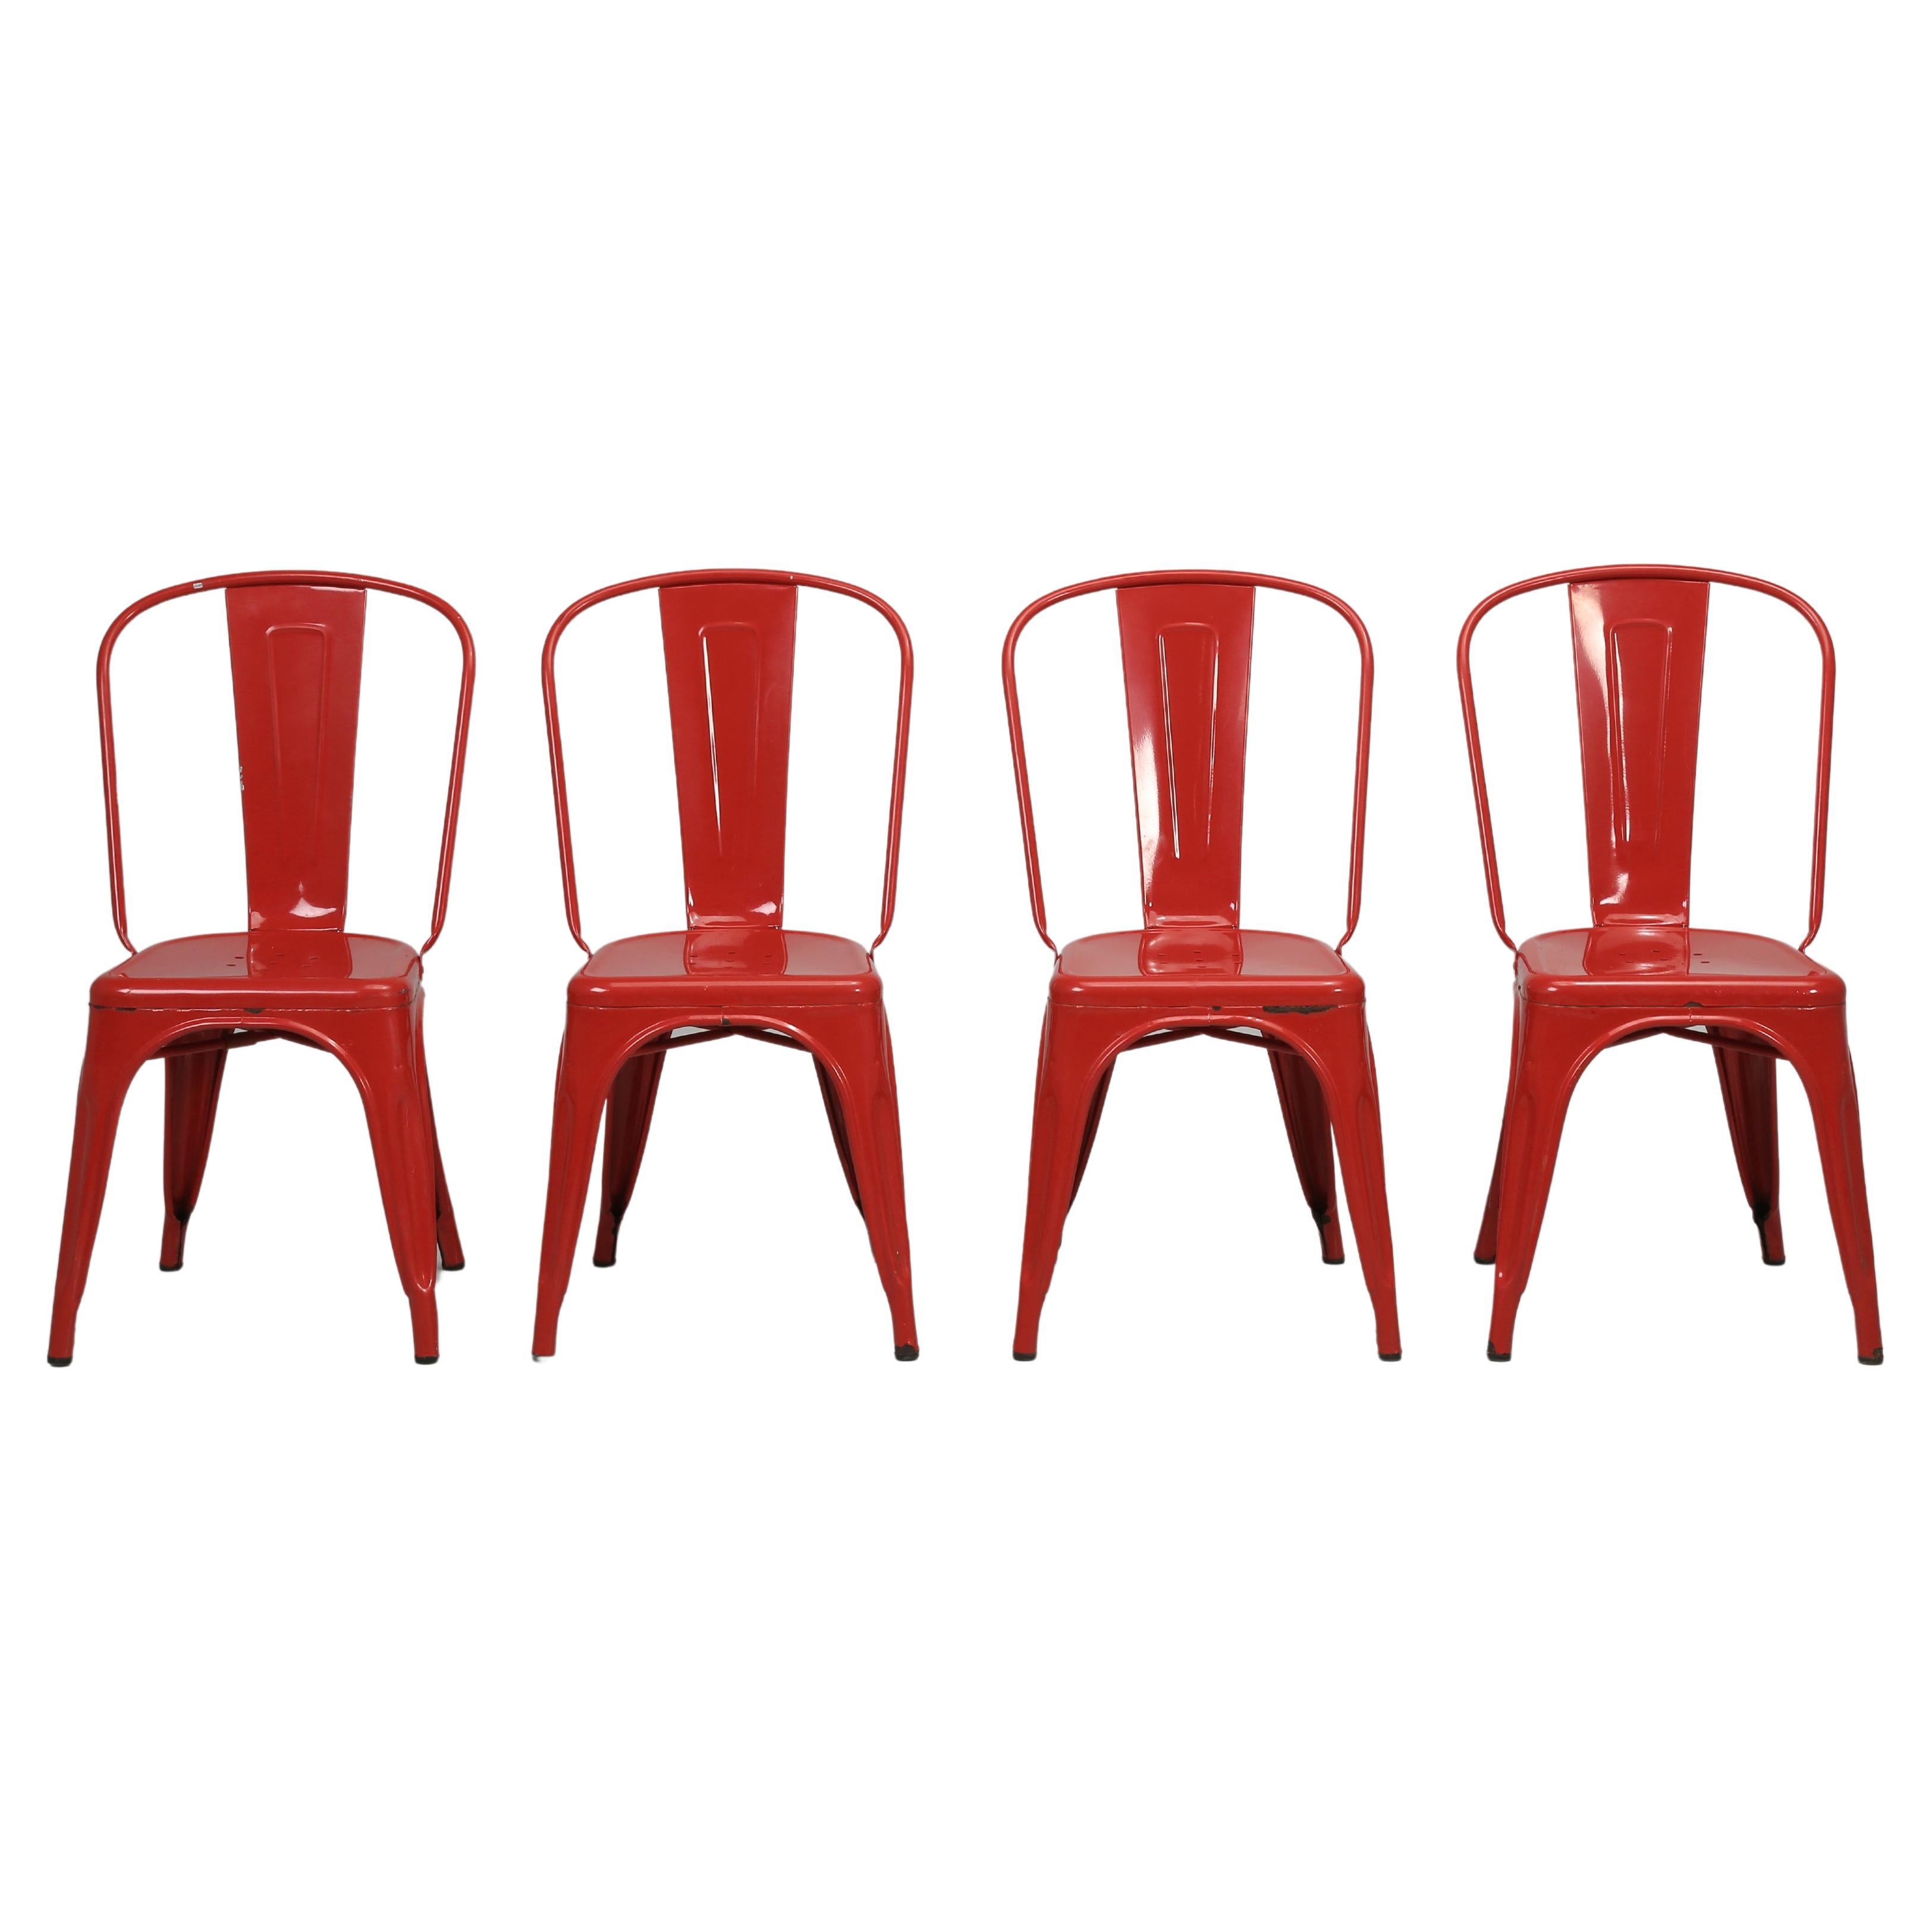 Tolix Set of (4) Authentic Vintage Red Steel Stacking Chairs Made in France For Sale